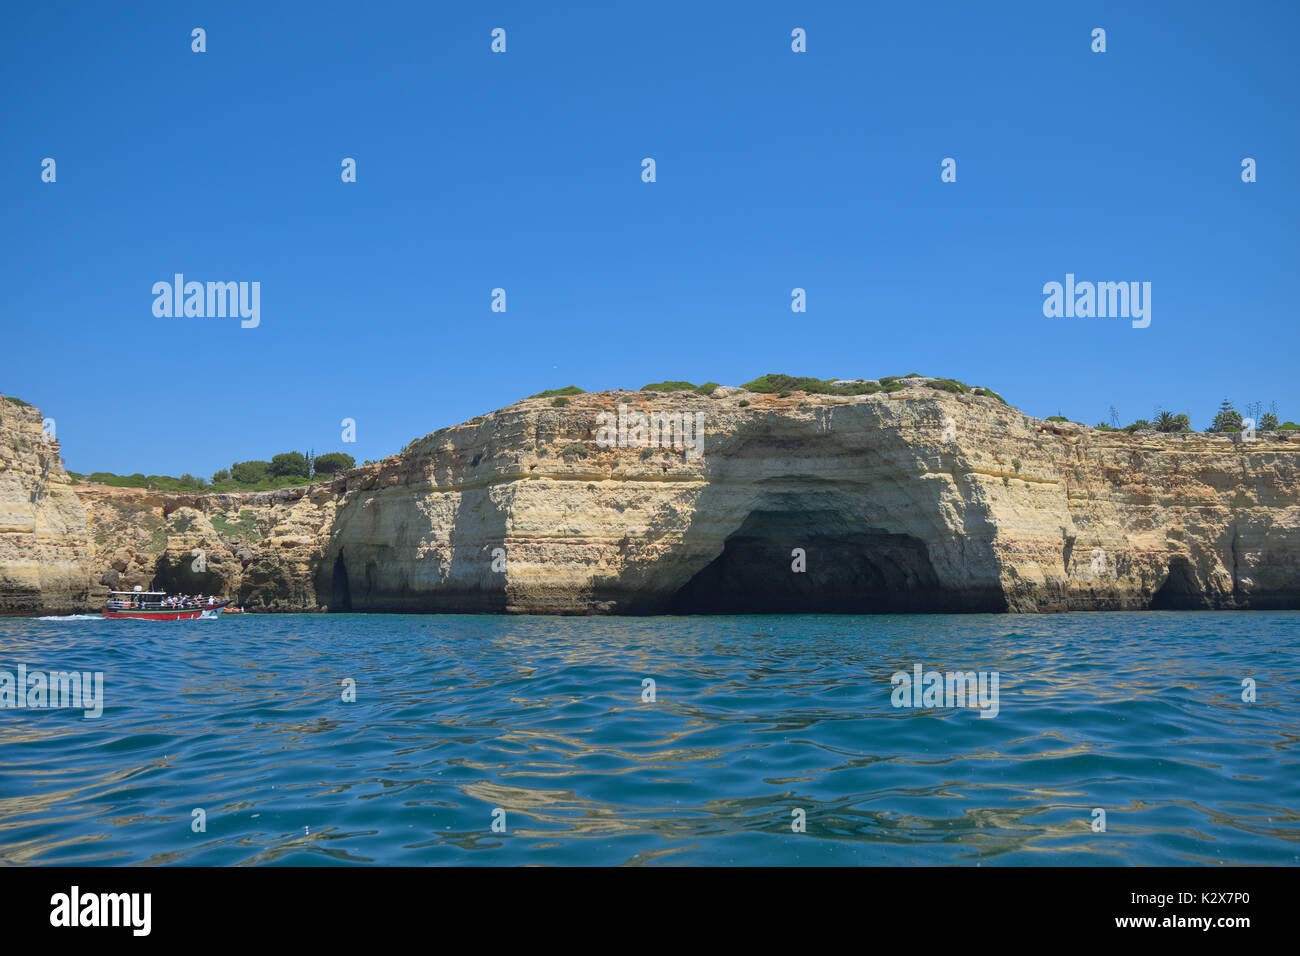 Tour boats visiting Carvoeiro caves and cliffs. Travel and vacation destinations Stock Photo